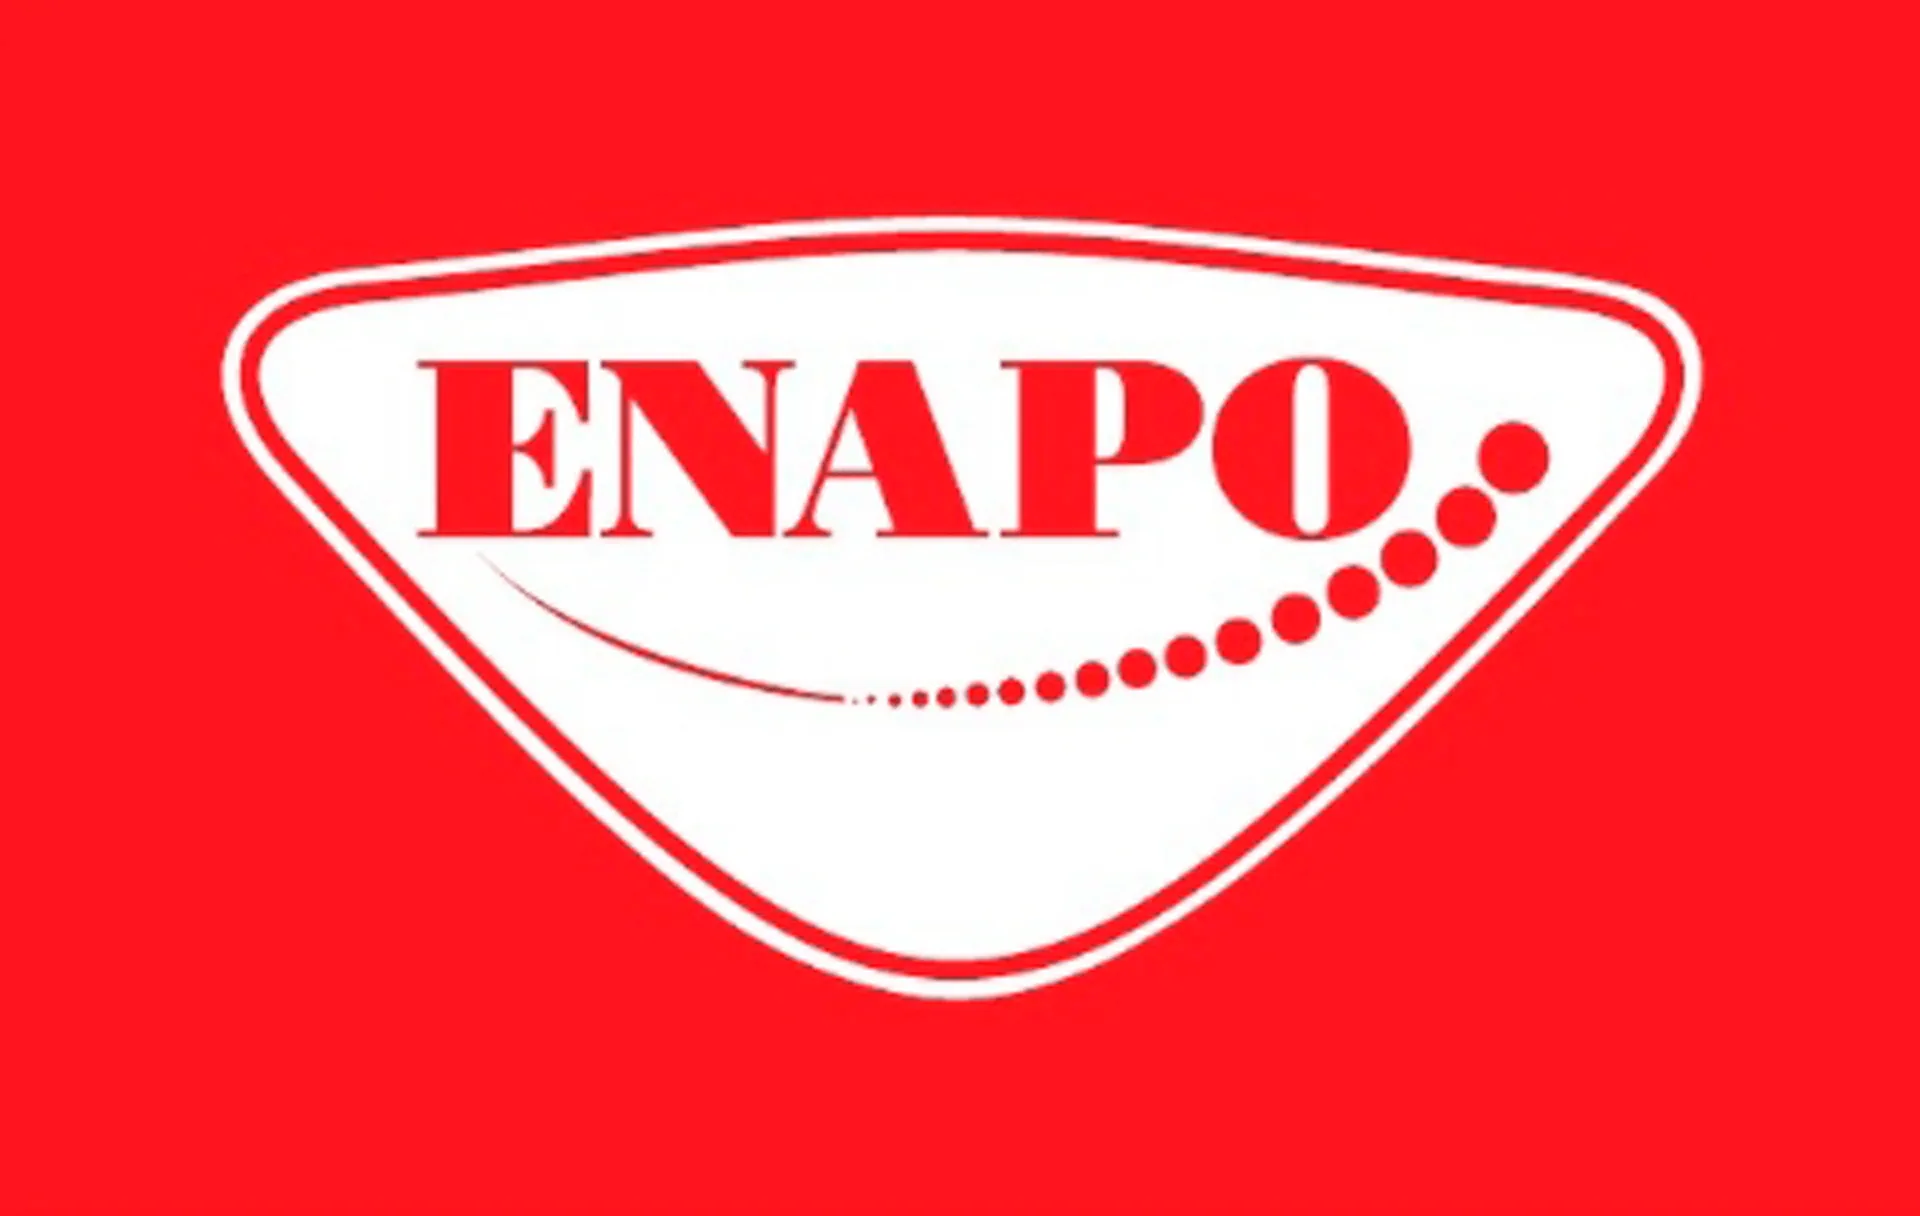 ENAPO logo of current flyer